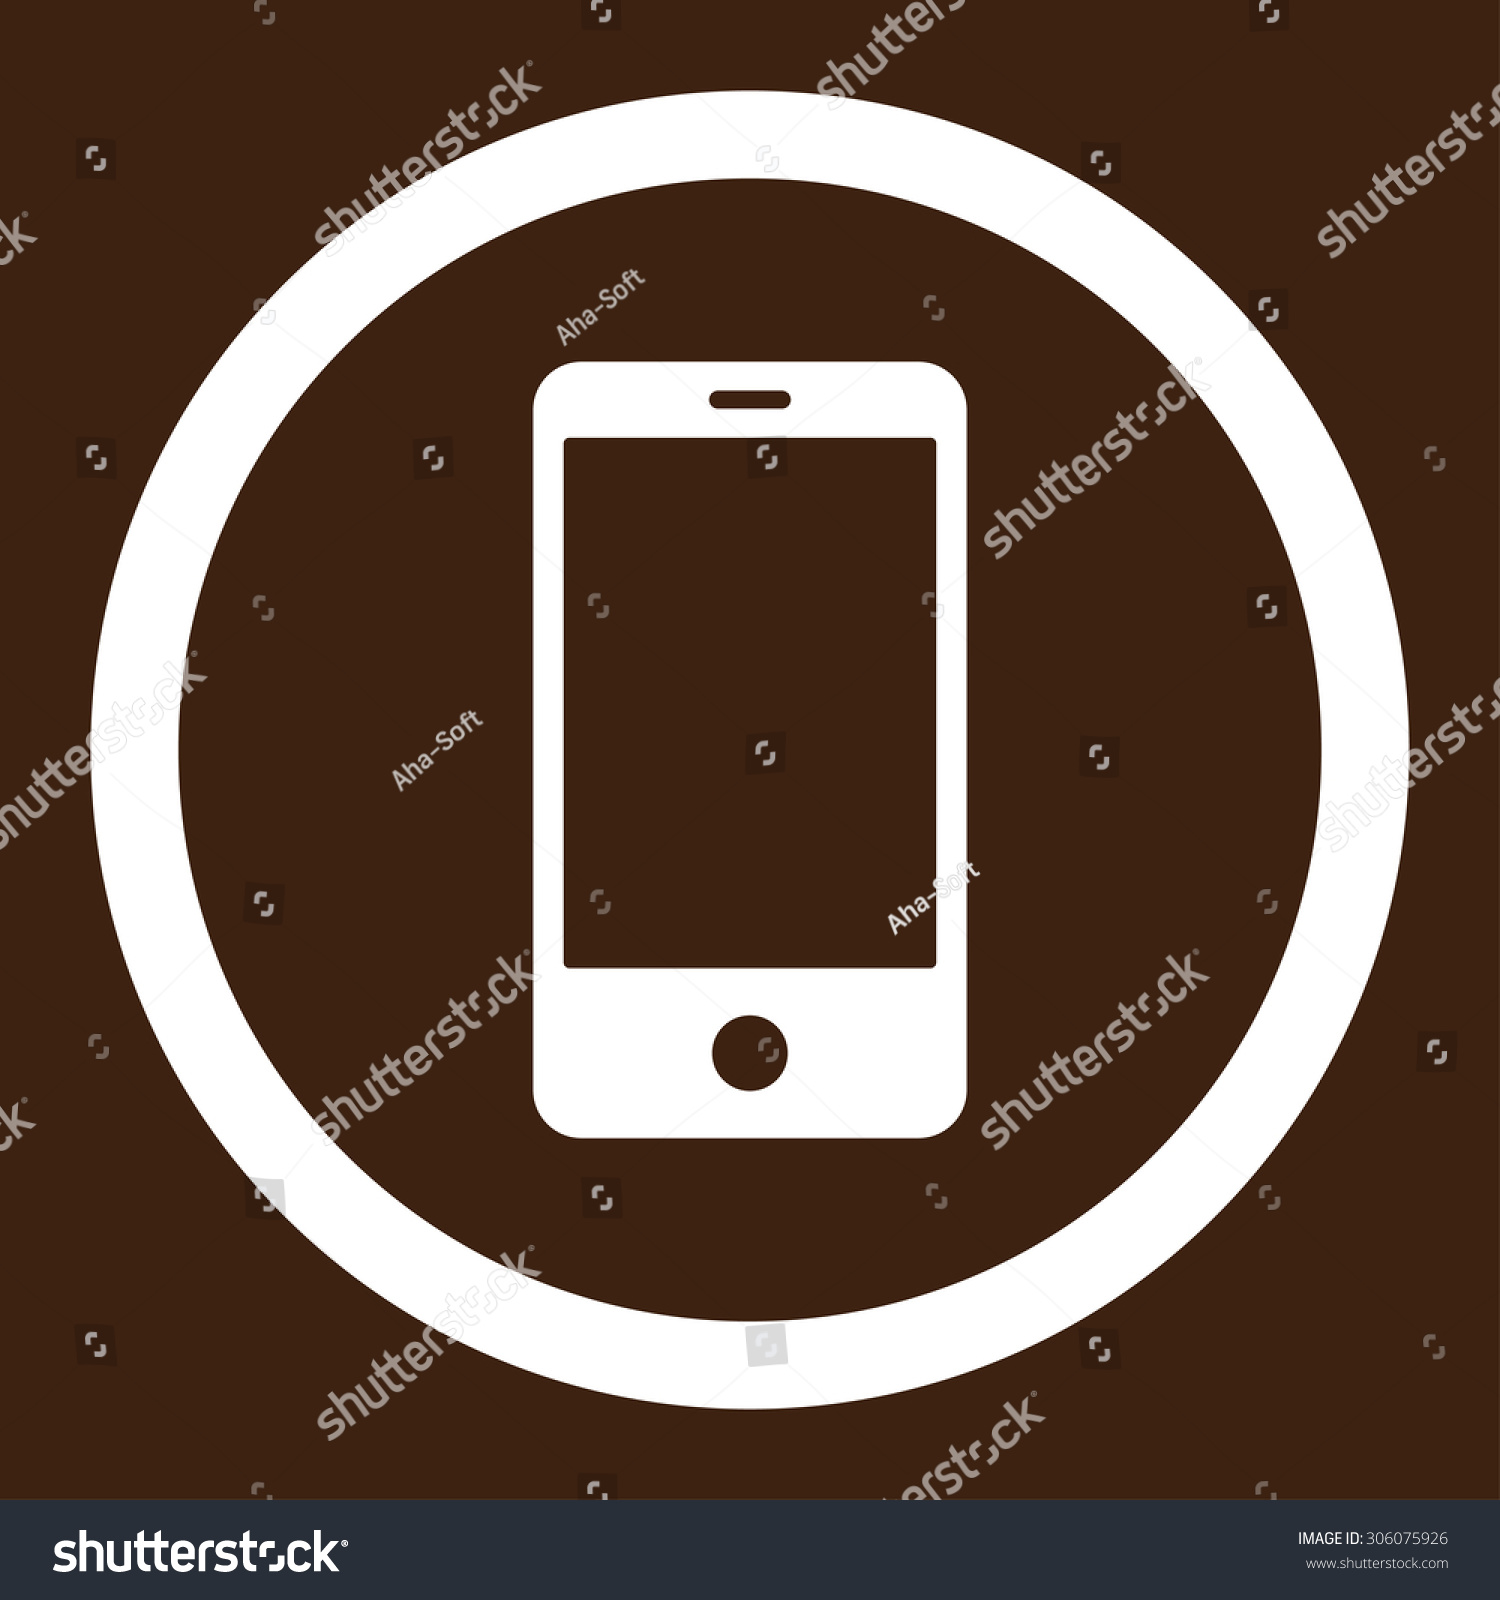 Round And Brown Mobile